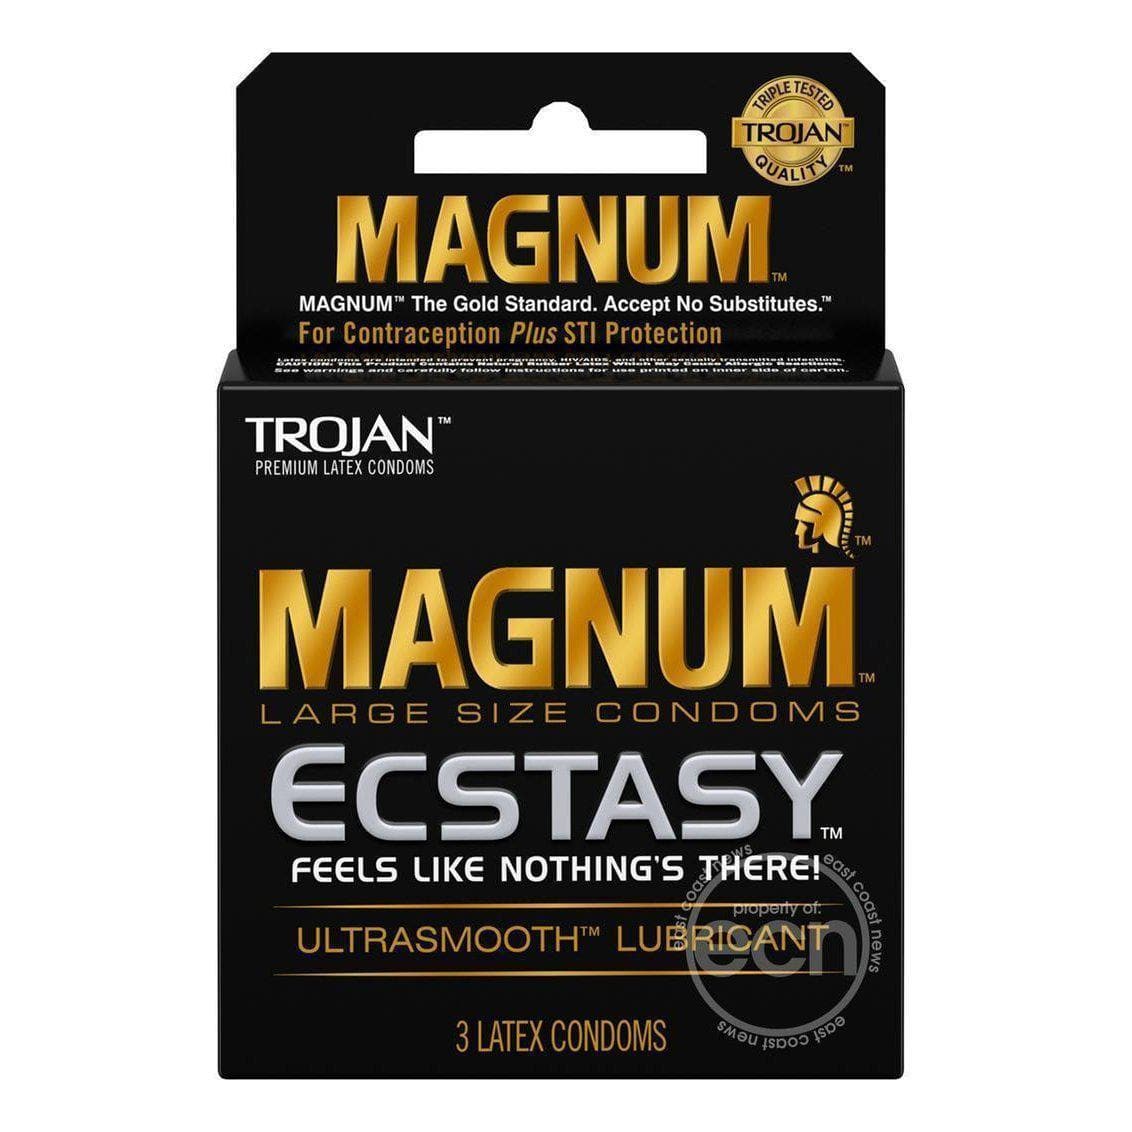 Trojan Magnum Ecstasy Ultra Smooth Lubricant Latex Condoms 3-Pack - Romantic Blessings